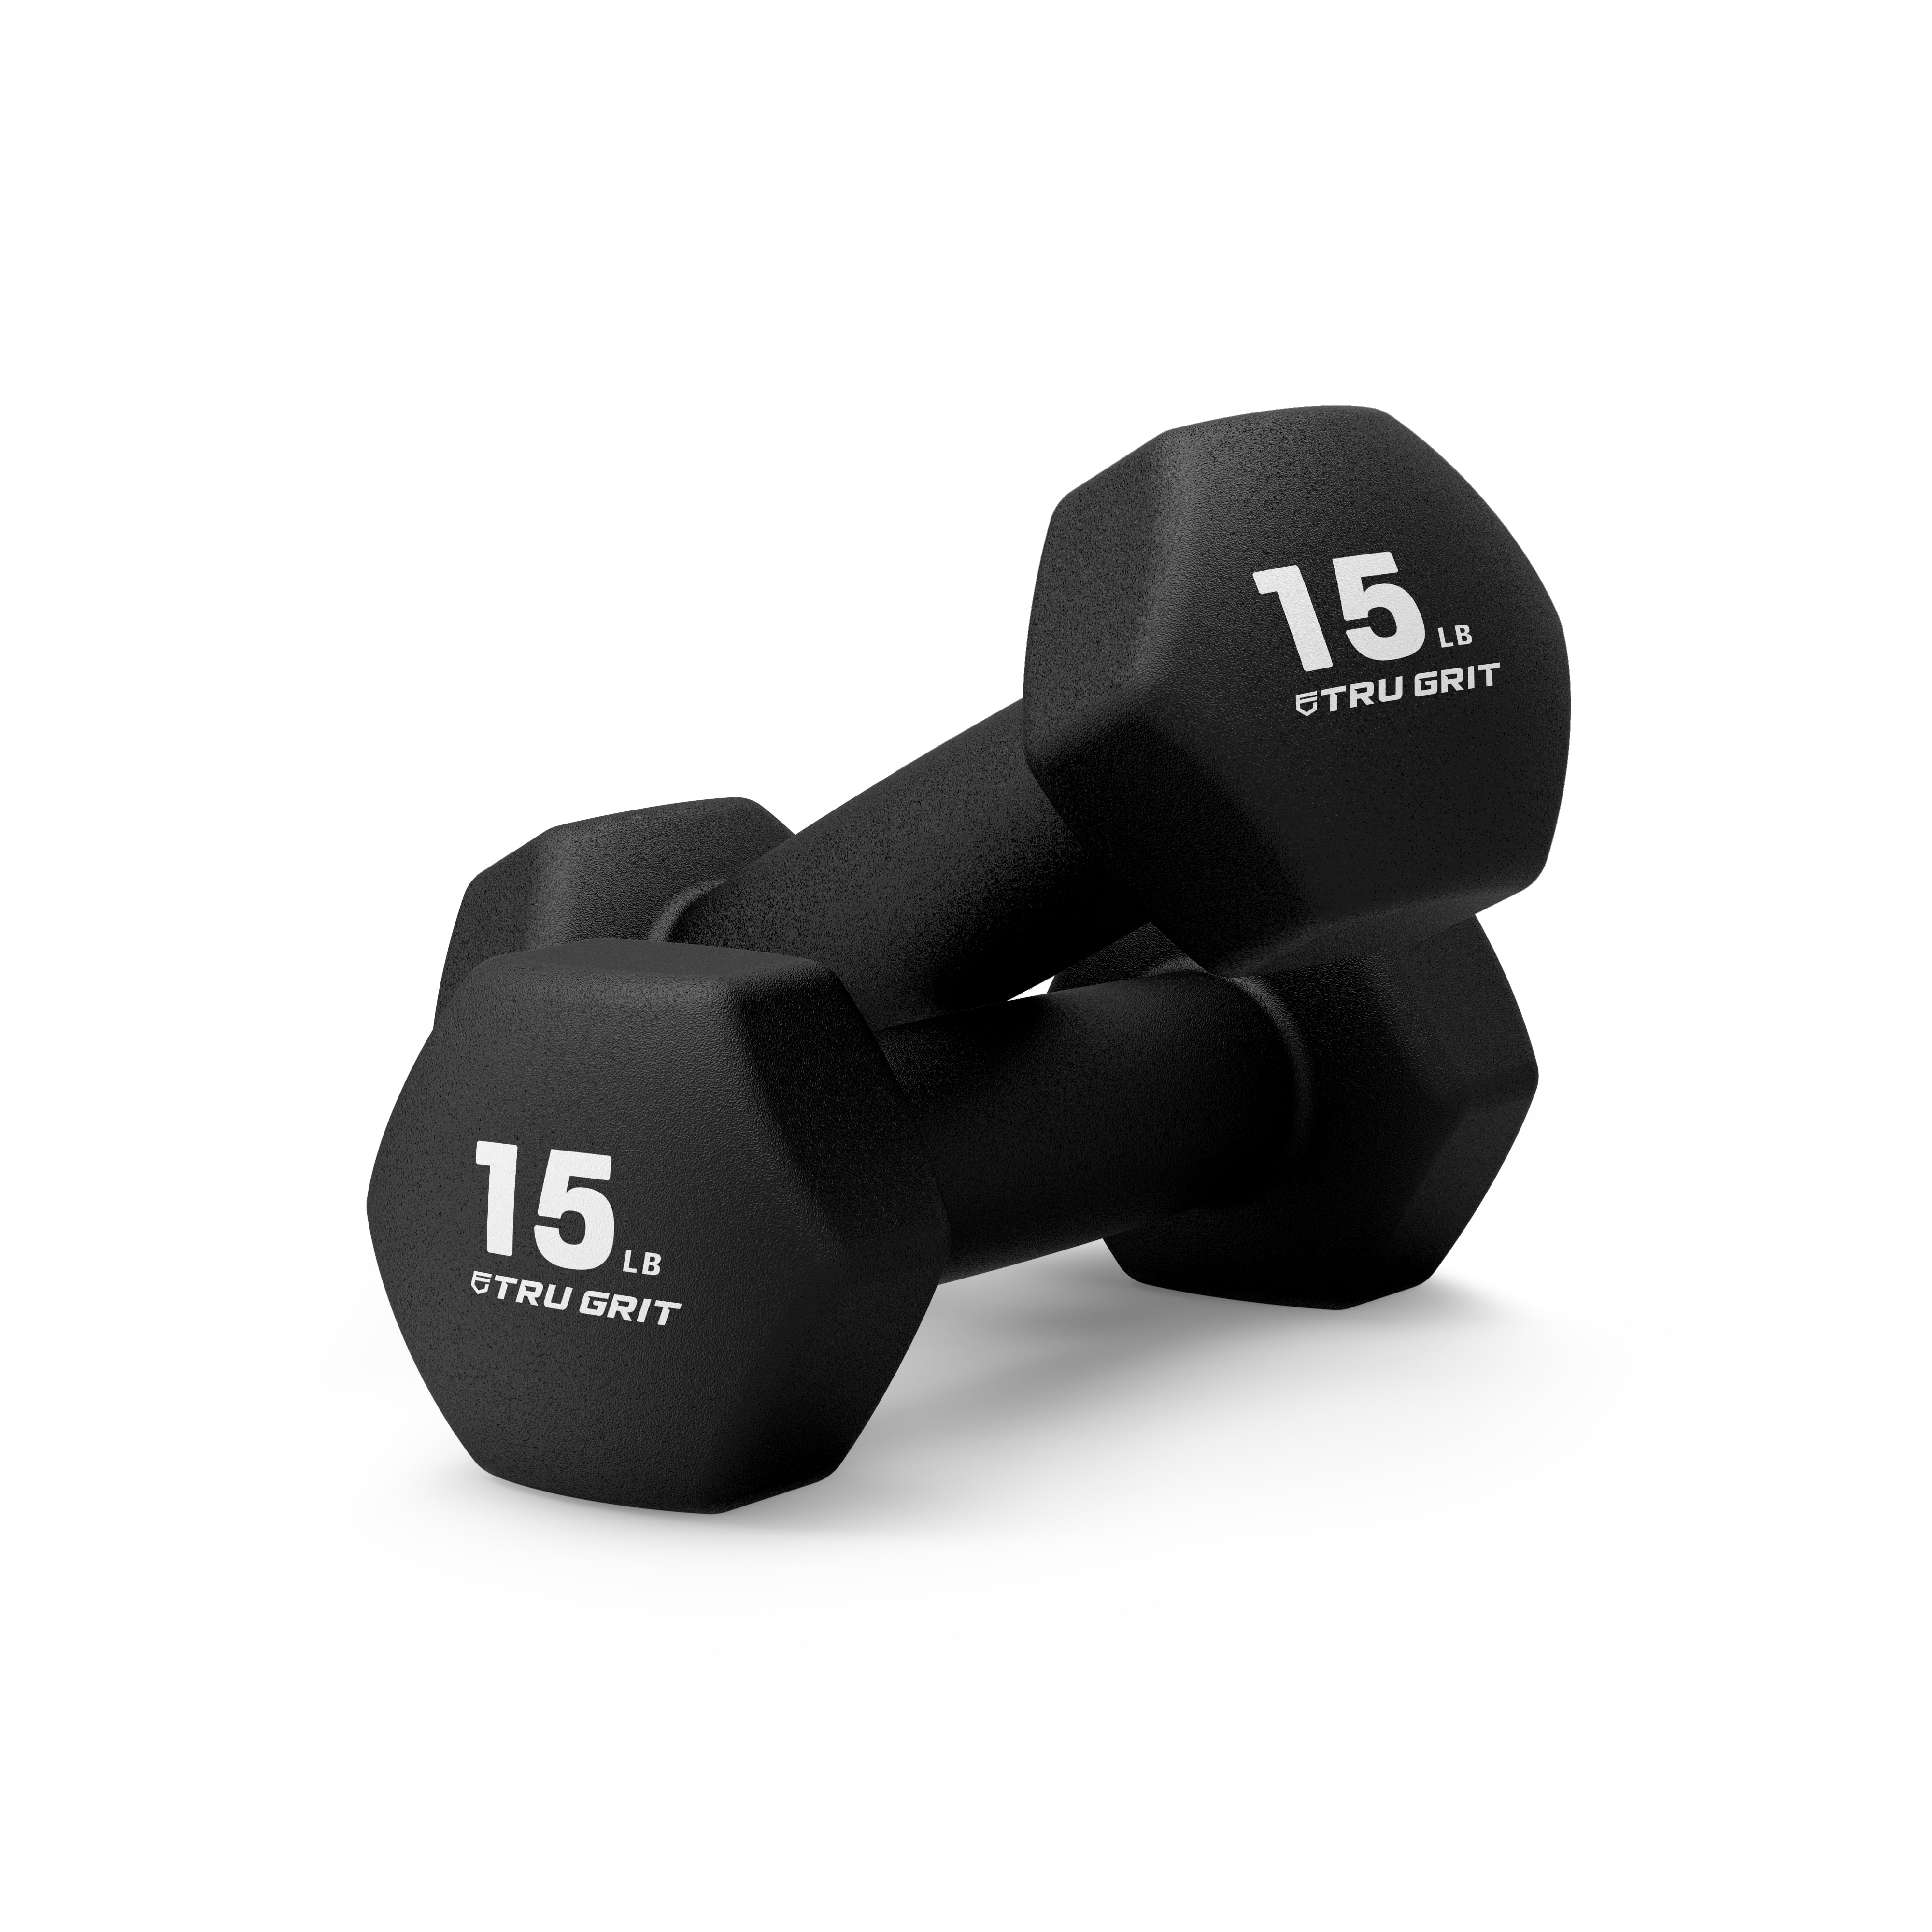 RUN.SE Set of 2 Adjustable Dumbbell Weight Pair with Non-Slip Neoprene Handle Multiple Weight Options Single All-Purpose Exercise Dumbbells 10KG